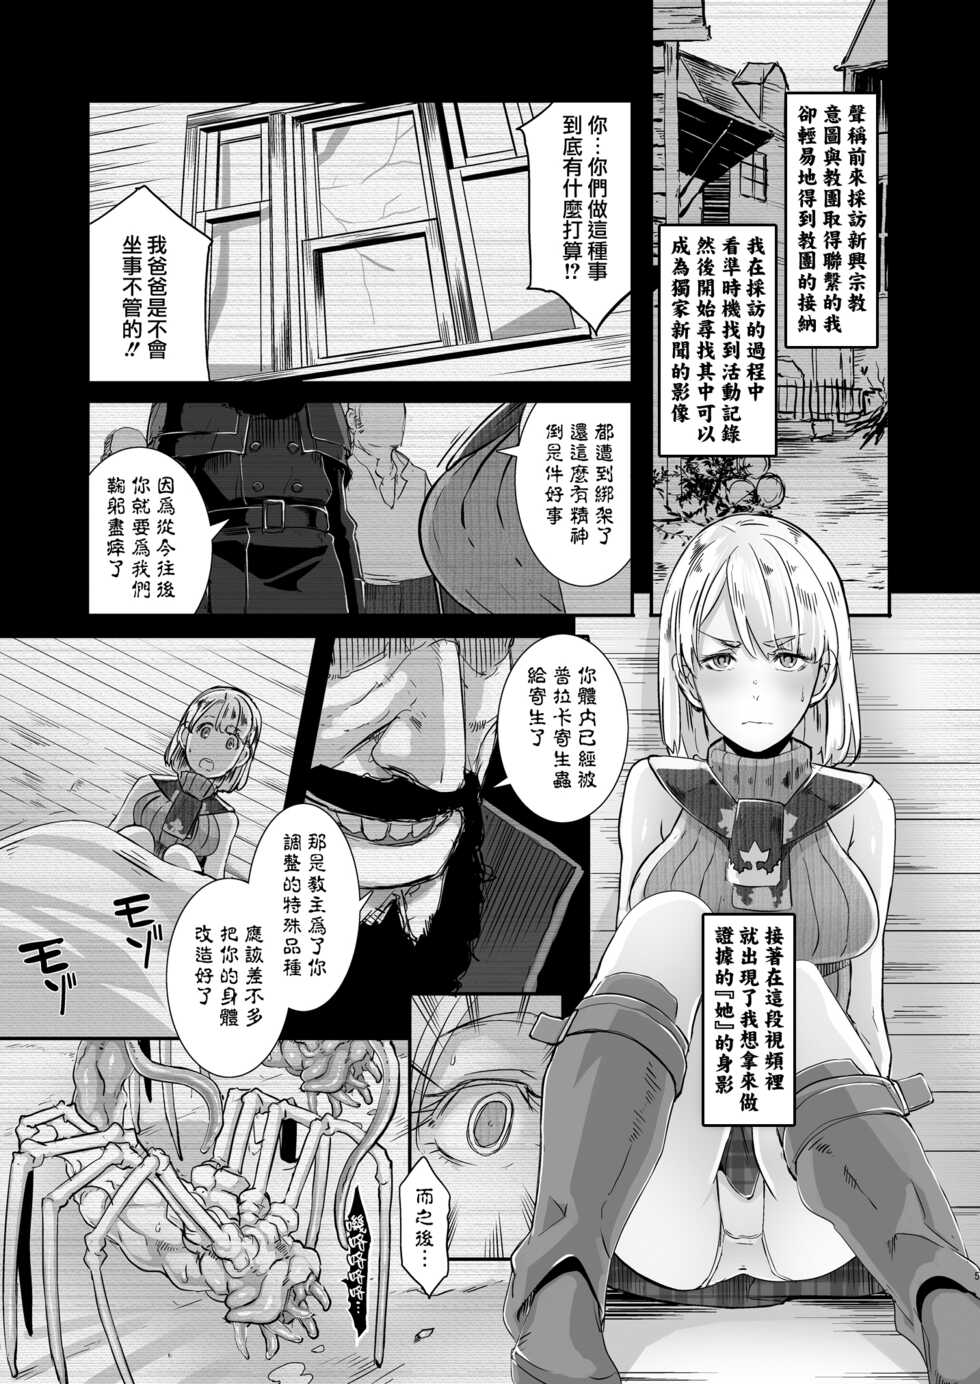 [EROQUIS! (Butcha-U)] GAMEOVERS-FILE1.1+2.0 (Resident Evil) [Chinese] [天帝哥個人漢化] [Digital] - Page 6